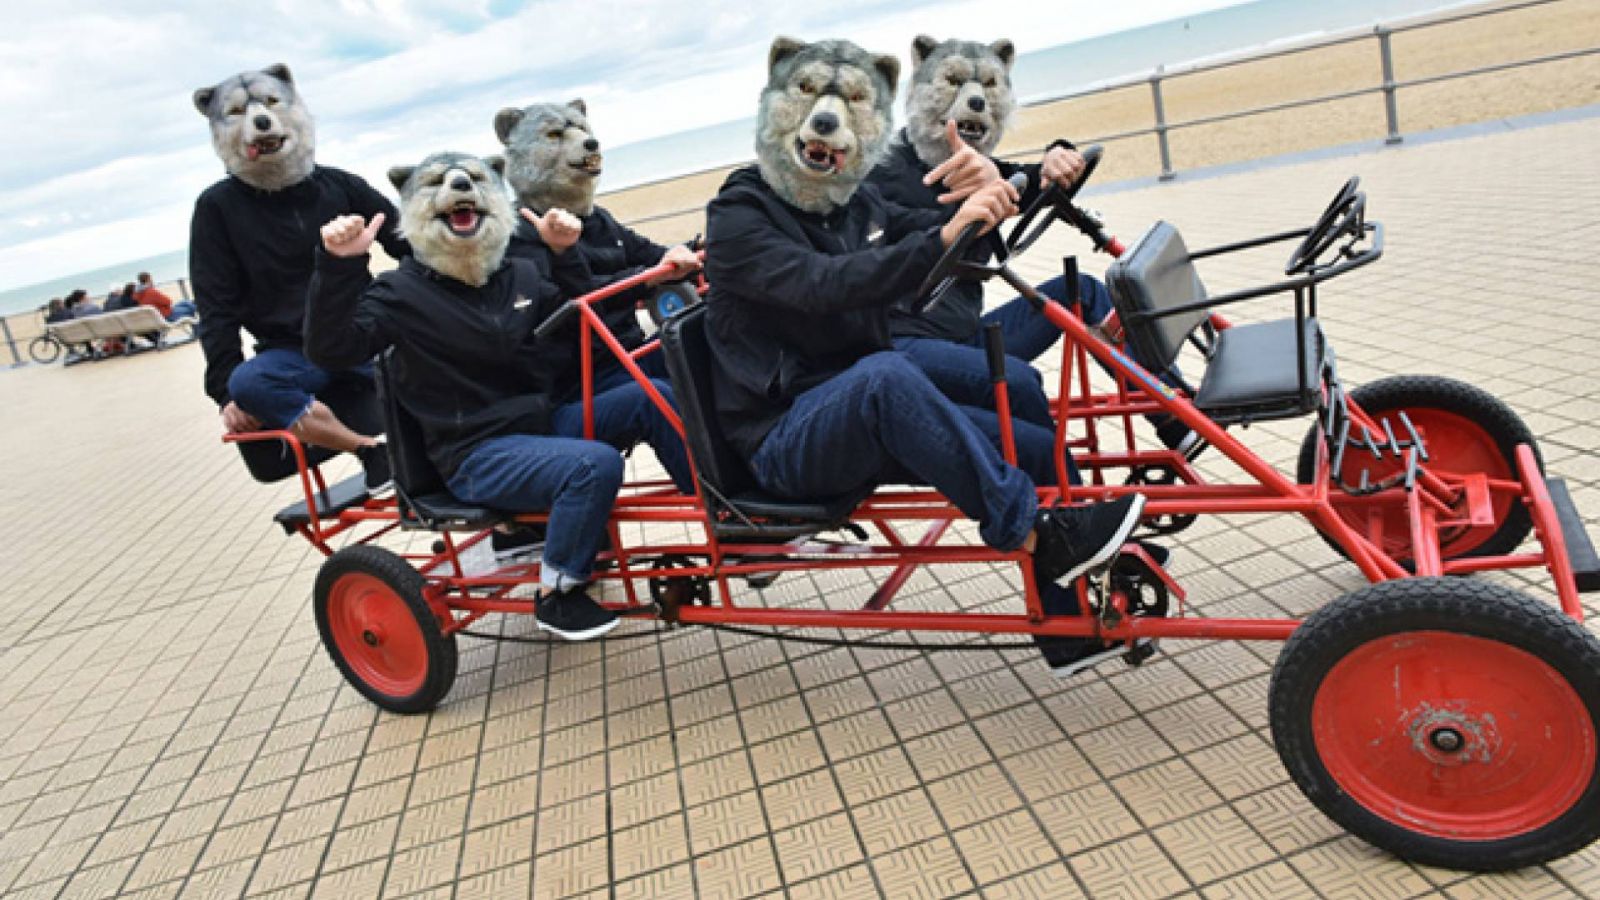 New Digital Single from MAN WITH A MISSION © Sony Music Entertainment (Japan) Inc. All rights reserved.